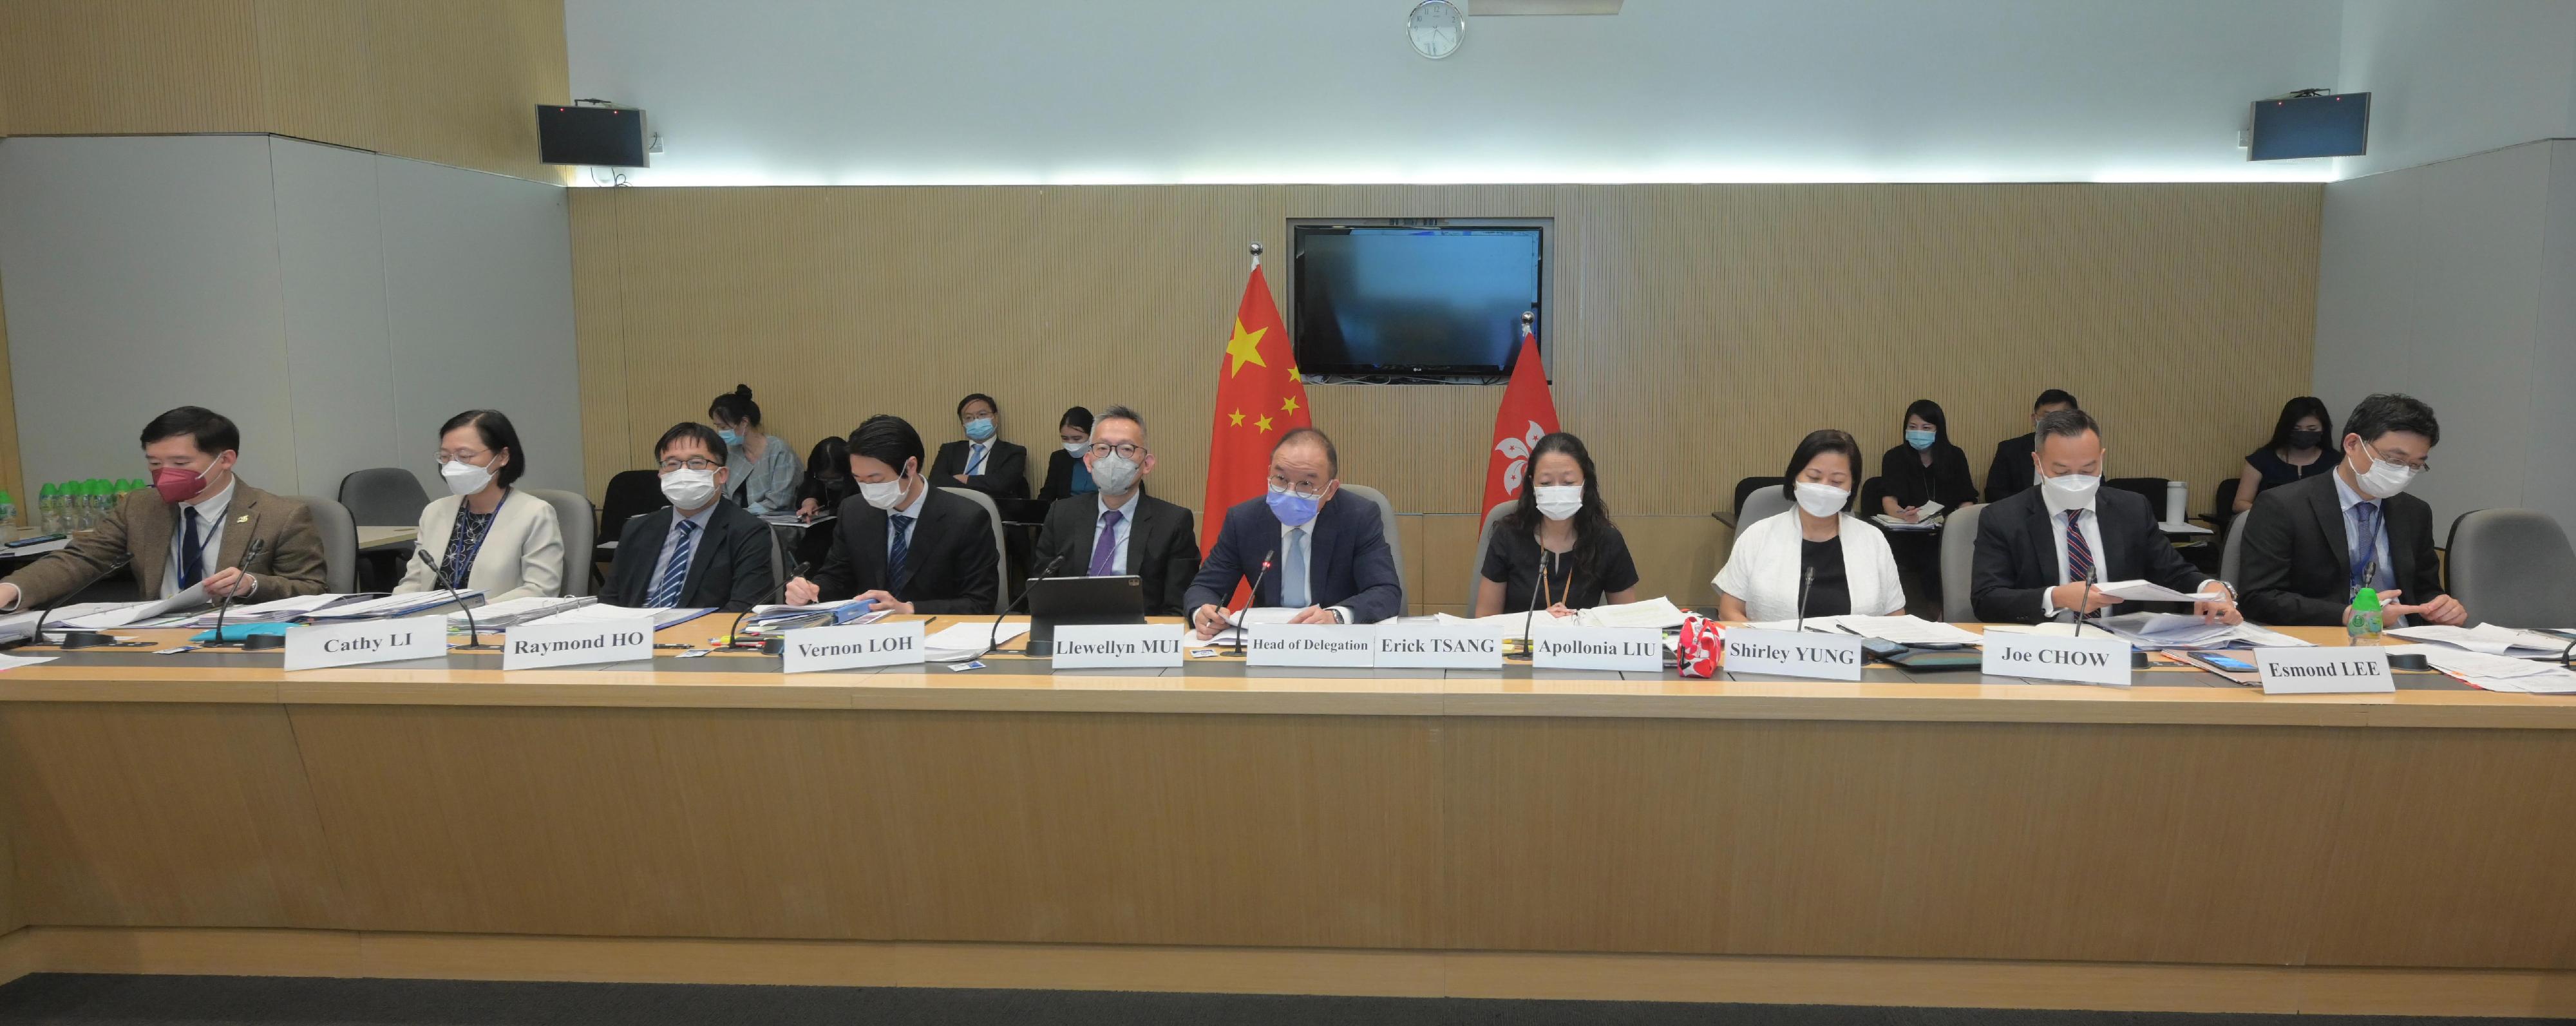 The Secretary for Constitutional and Mainland Affairs, Mr Erick Tsang Kwok-wai (front row, fifth right), led the delegation of the Hong Kong Special Administrative Region Government to attend the meeting of the United Nations Human Rights Committee by videoconferencing today (July 12). Photo shows (front row, from left) the Under Secretary for Constitutional and Mainland Affairs, Mr Clement Woo; the Principal Assistant Secretary (Constitutional and Mainland Affairs), Miss Cathy Li; the Deputy Commissioner for Labour (Labour Administration), Mr Raymond Ho; the Senior Assistant Solicitor General (Human Rights), Mr Vernon Loh; the Acting Solicitor General, Mr Llewellyn Mui; Mr Tsang; Deputy Secretary for Security Mrs Apollonia Liu; Deputy Secretary for Security Miss Shirley Yung; the Deputy Commissioner of Police (Management), Mr Joe Chow; and Deputy Secretary for Education Mr Esmond Lee attending the meeting.